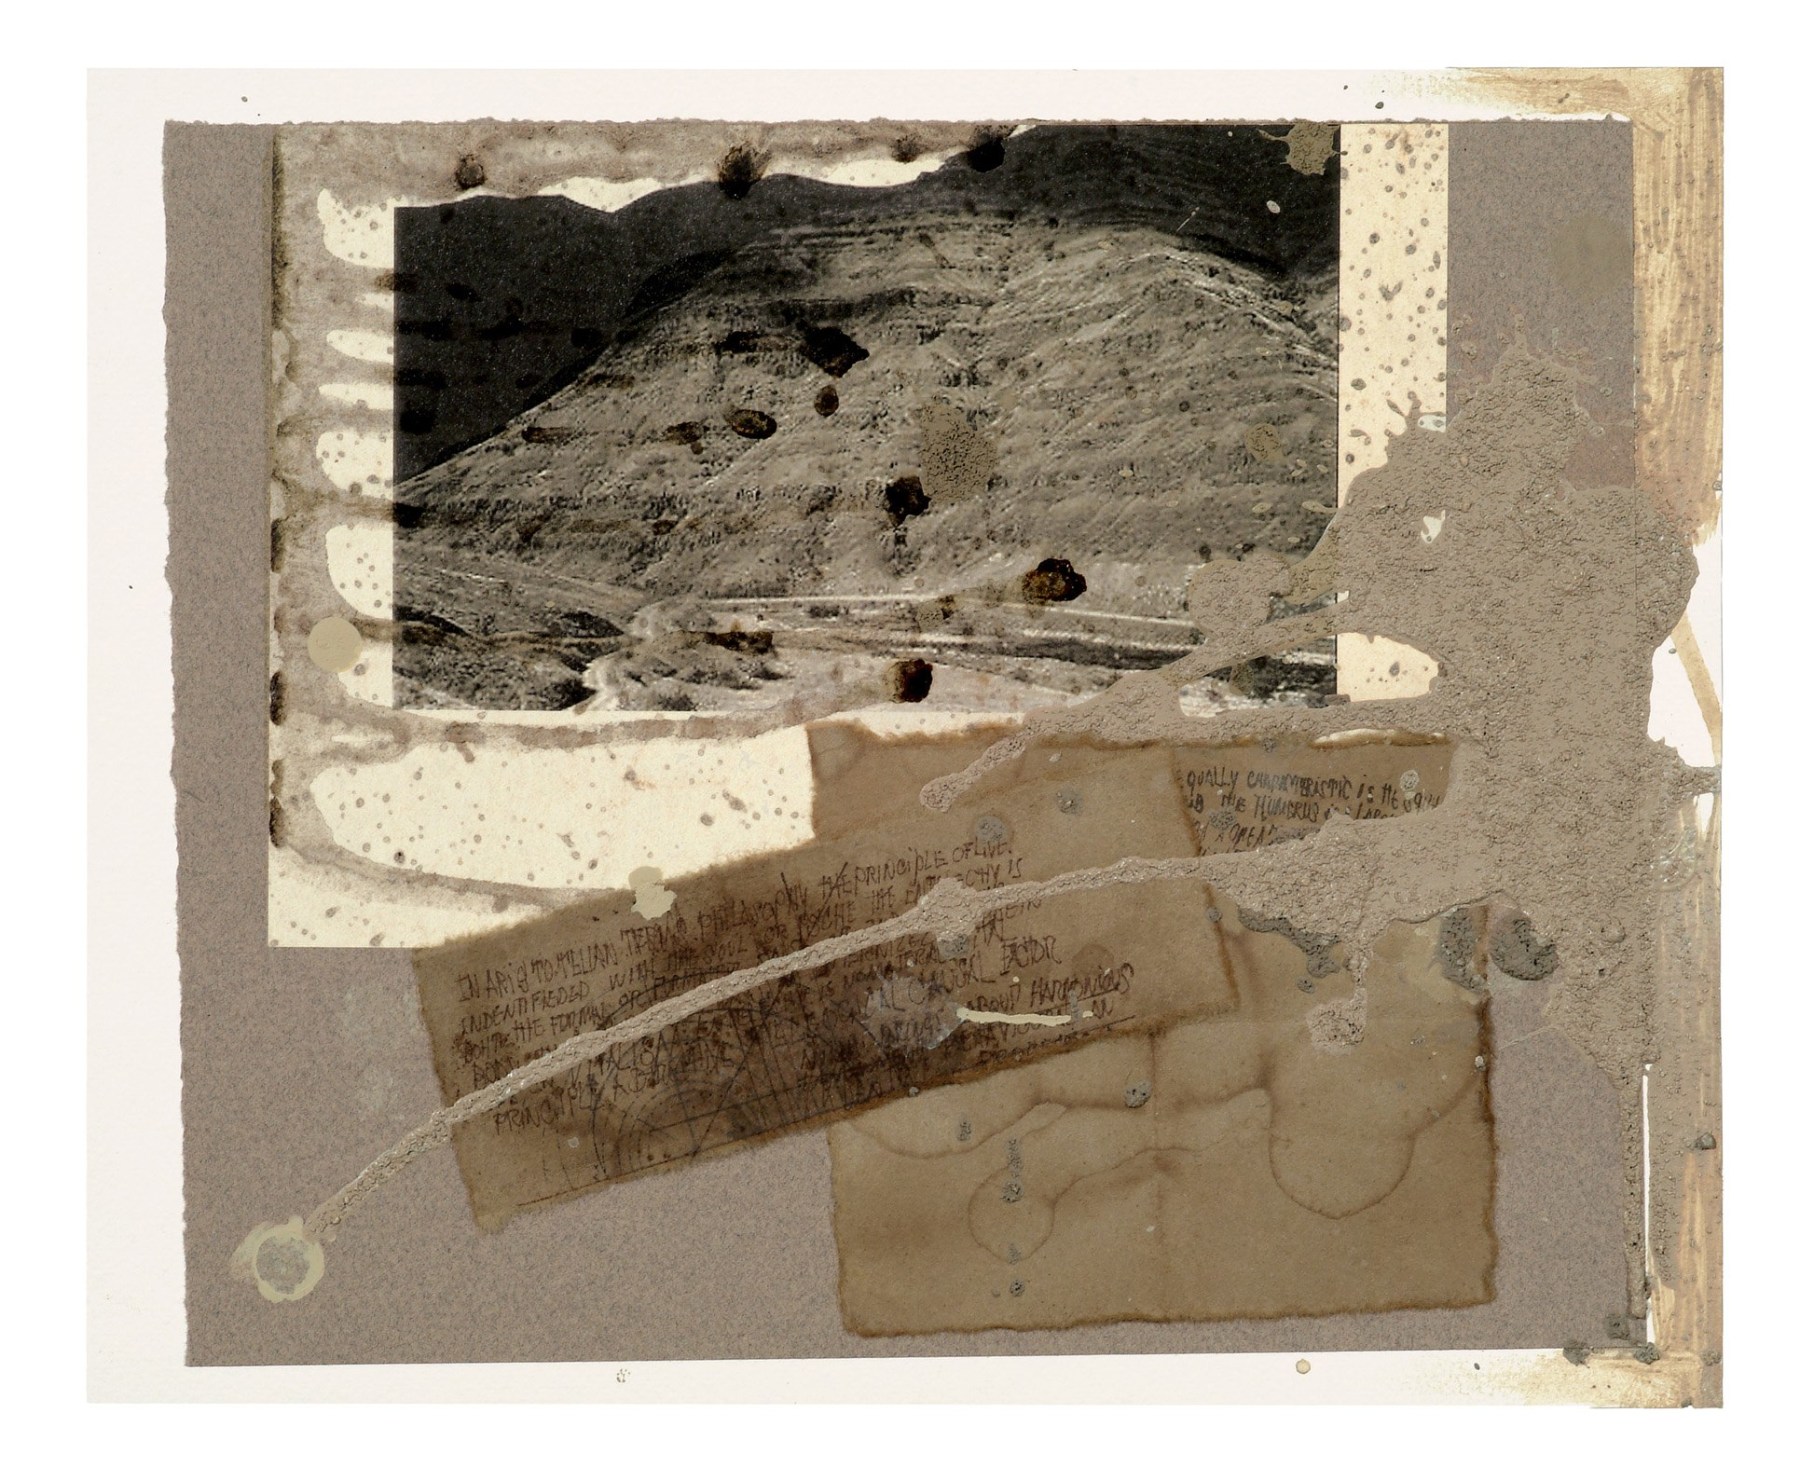 Untitled, 2002&ndash;03 Cardboard, print, rice paper, oil, sand, acrylic, and ink on cardboard